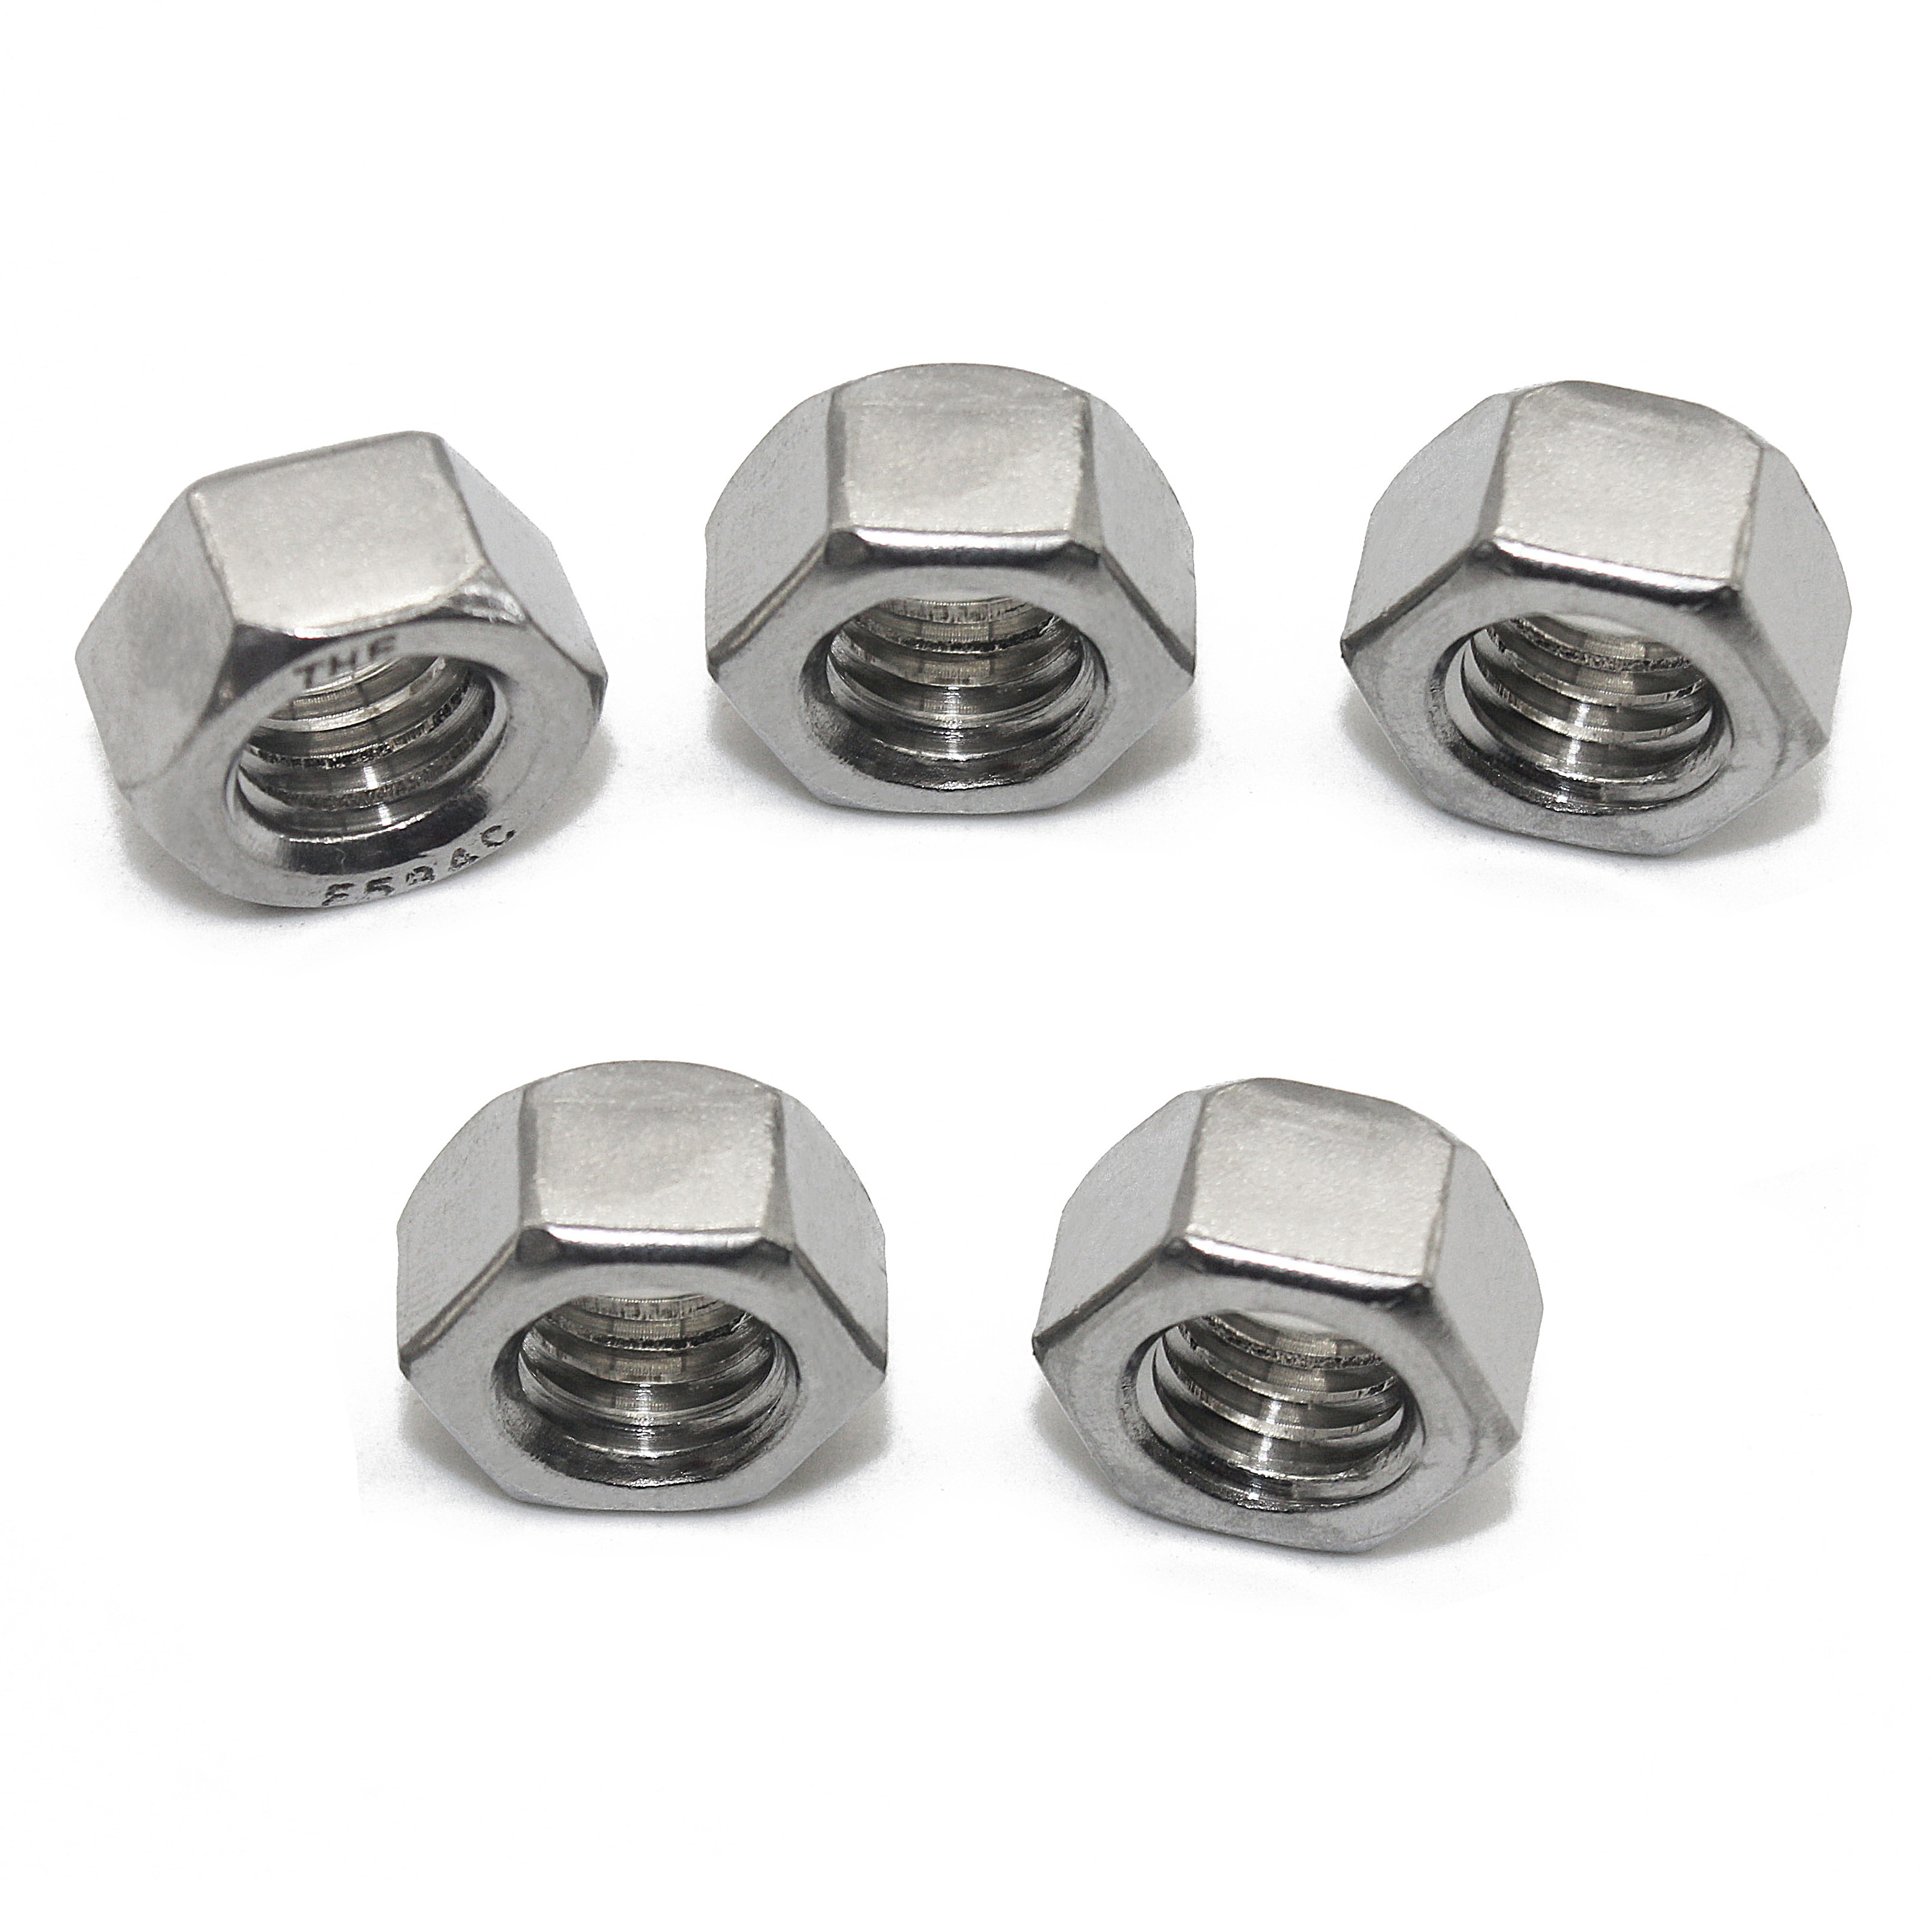 Details about   METRIC NUTS A2 STAINLESS STEEL HEX NUTS M3,M4,M5,M6,M8,M10,M12 